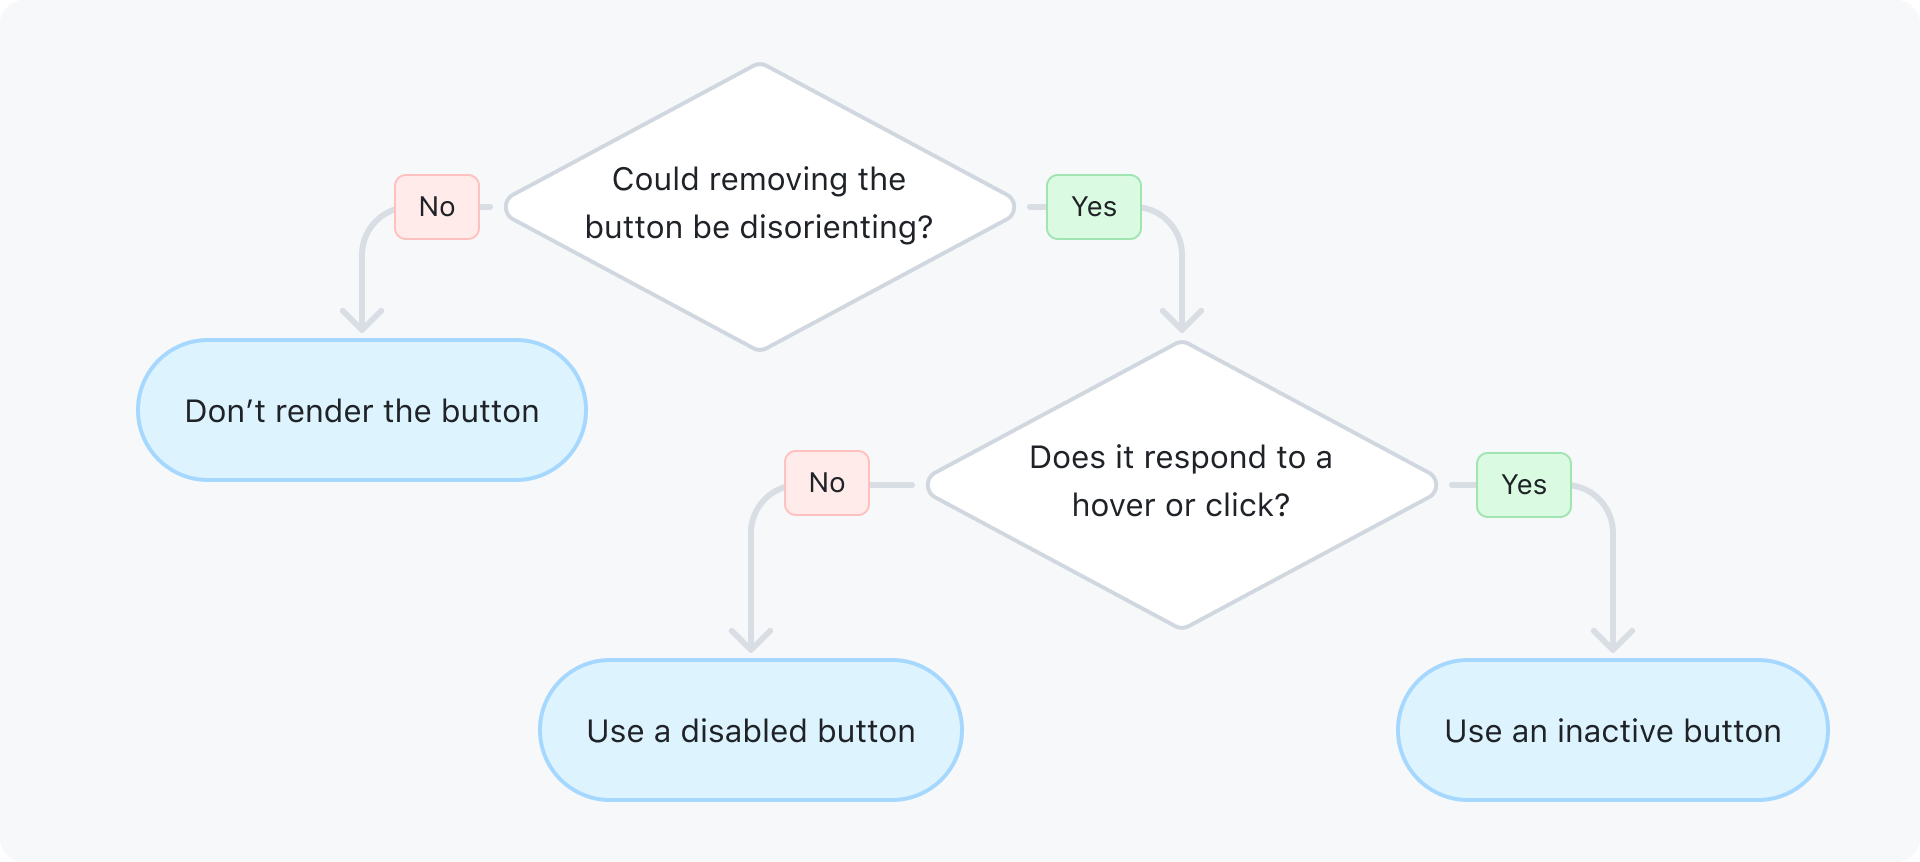 Decision tree for how to handle a non-functional button. Could removing the button be disorienting? If no, don't render the button. If yes: does it respond to a hover or click? If yes, use an inactive button. If no, use a disabled button.